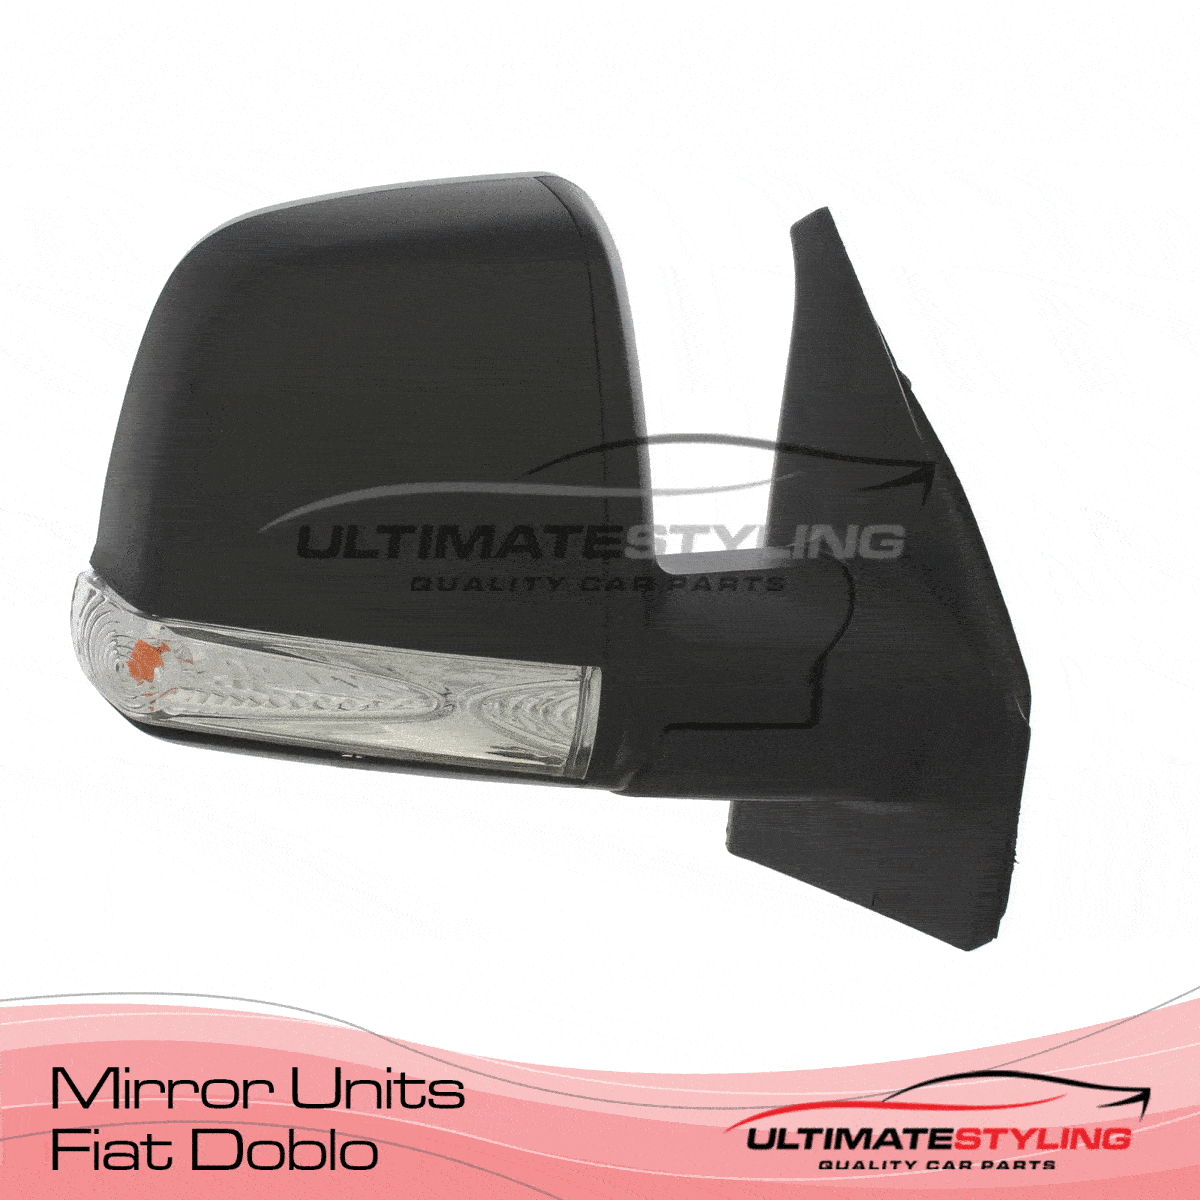 360 view of a Fiat Doblo wing mirror